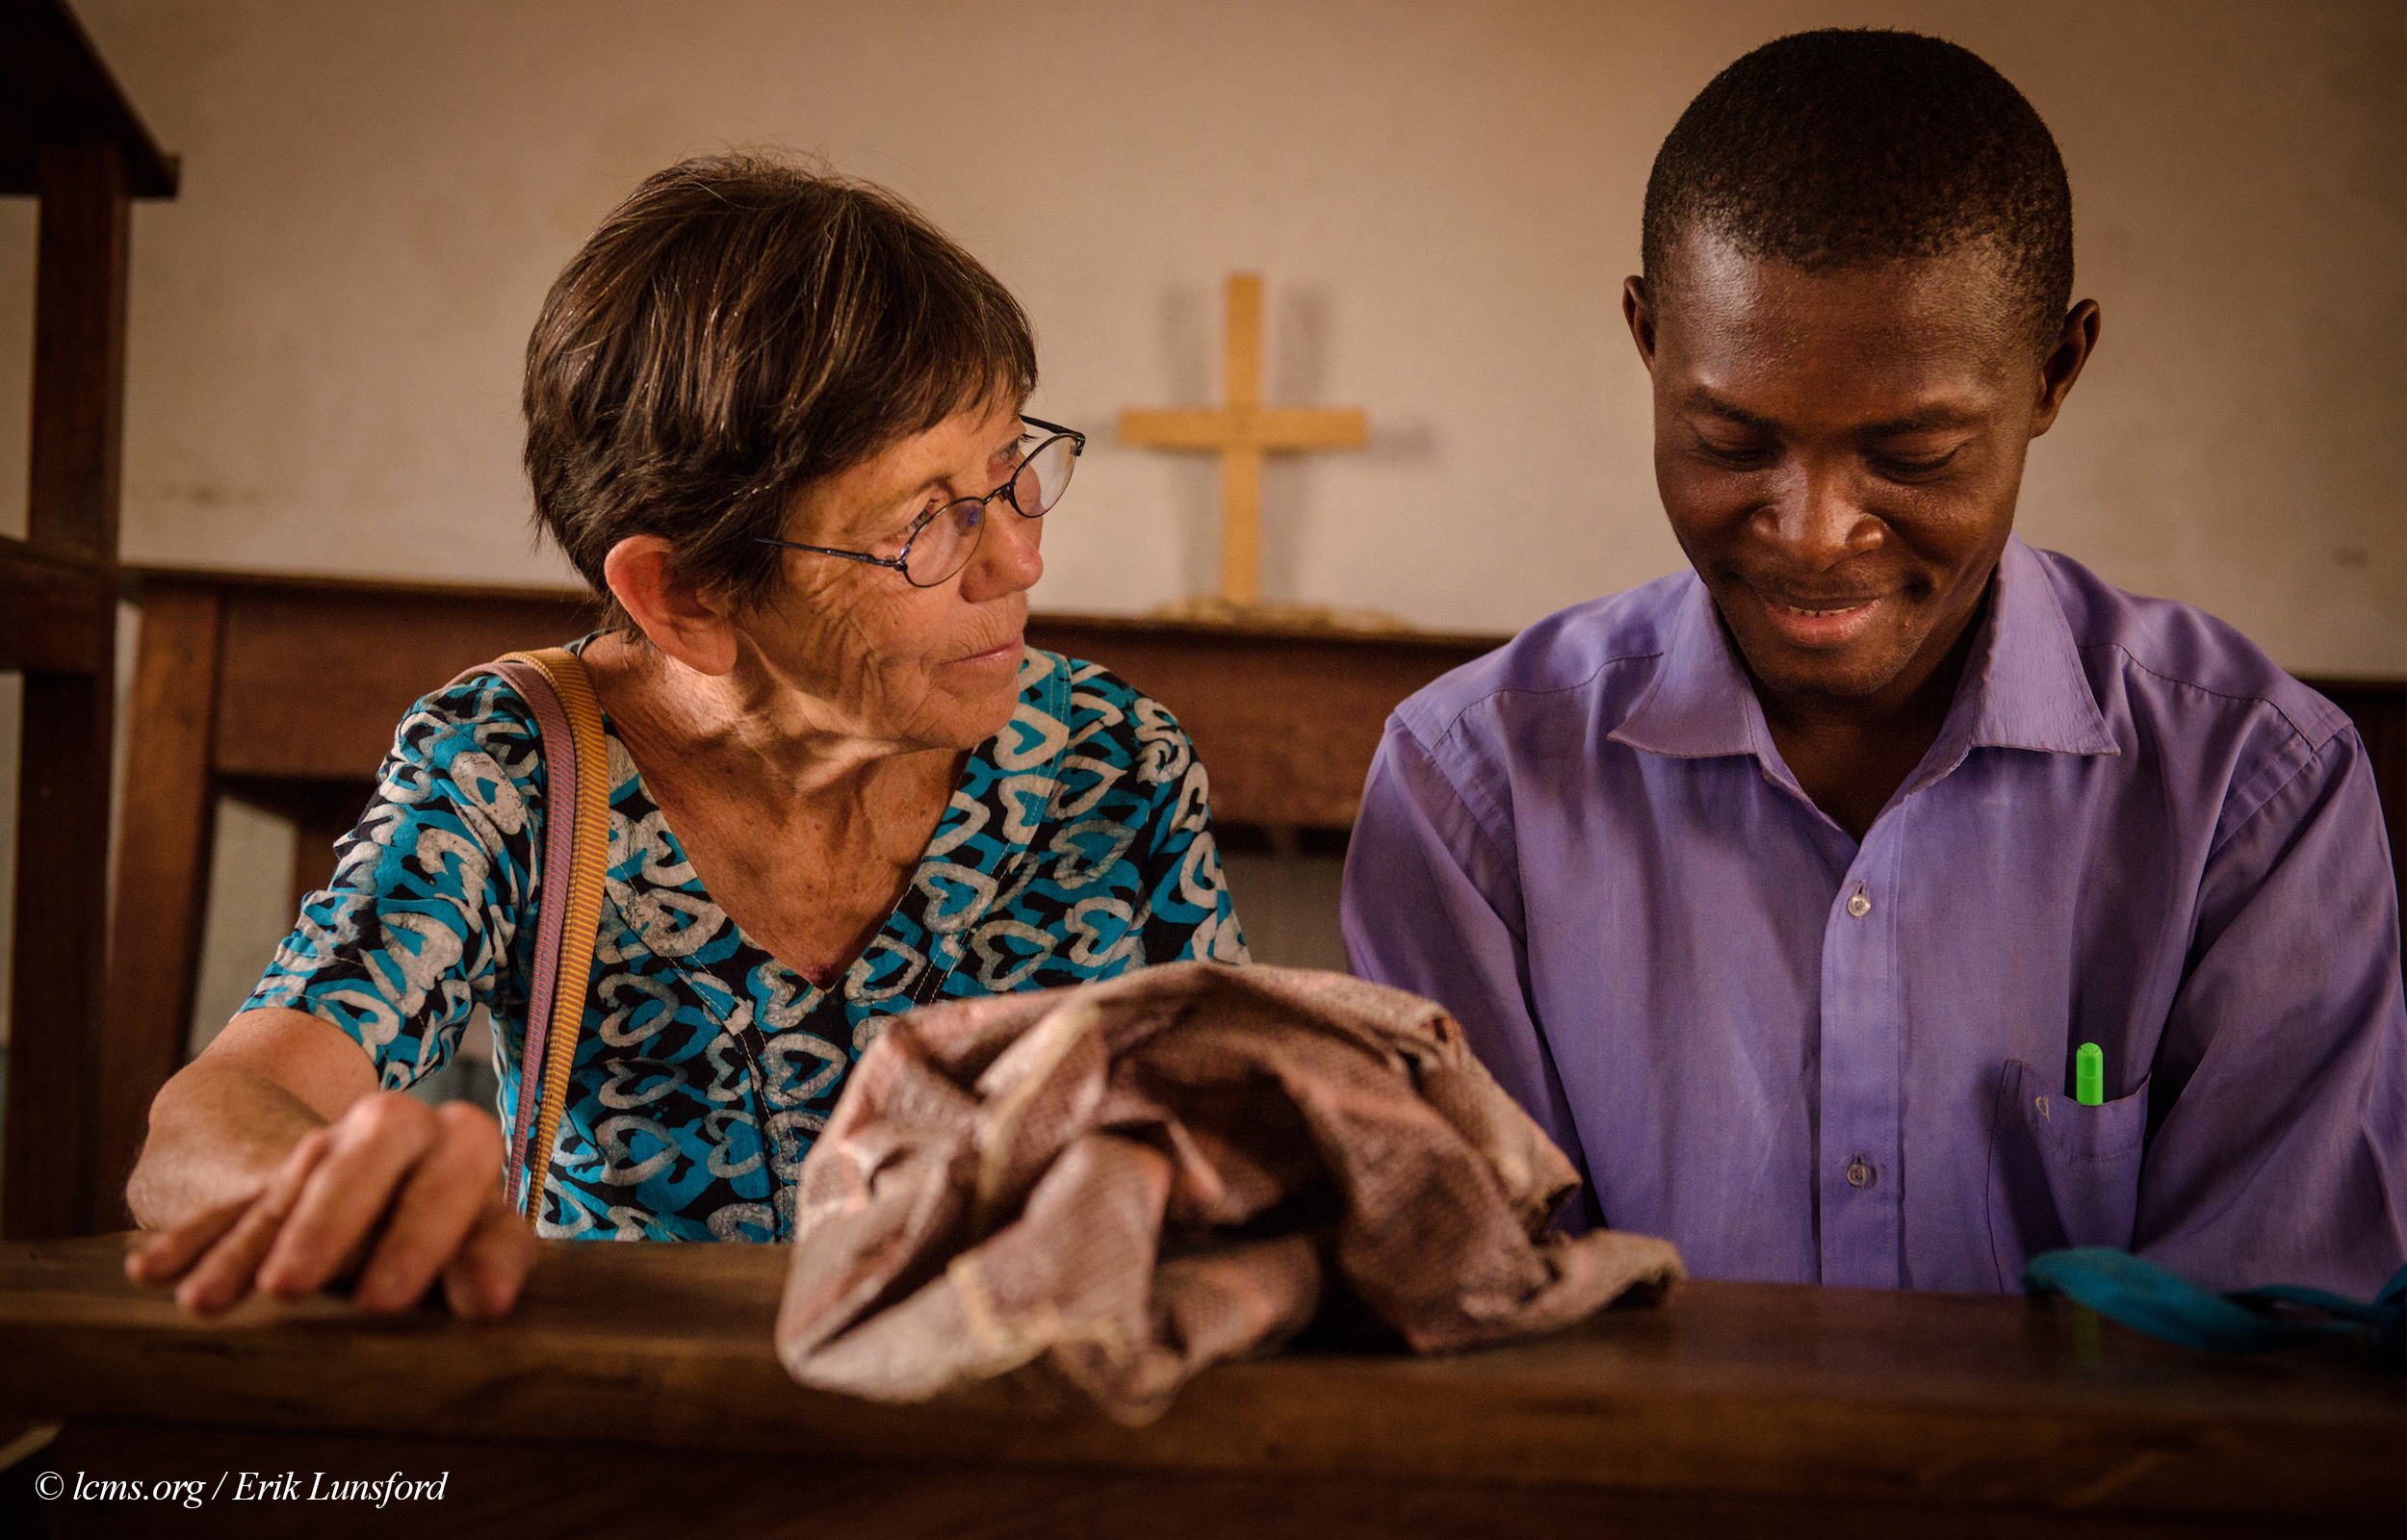 Valerie Stonebreaker, LCMS missionary to Togo, confers with Vicar Djekoab Yantchiemaen following Bible study at the Lutheran Church of Togo in Lokpano on Monday, Feb. 13, 2017, in Lokpano, Togo. Yantchiemaen graduated at the Lutheran Center for Theological Studies (CLET) in Dapaong. LCMS Communications/Erik M. Lunsford